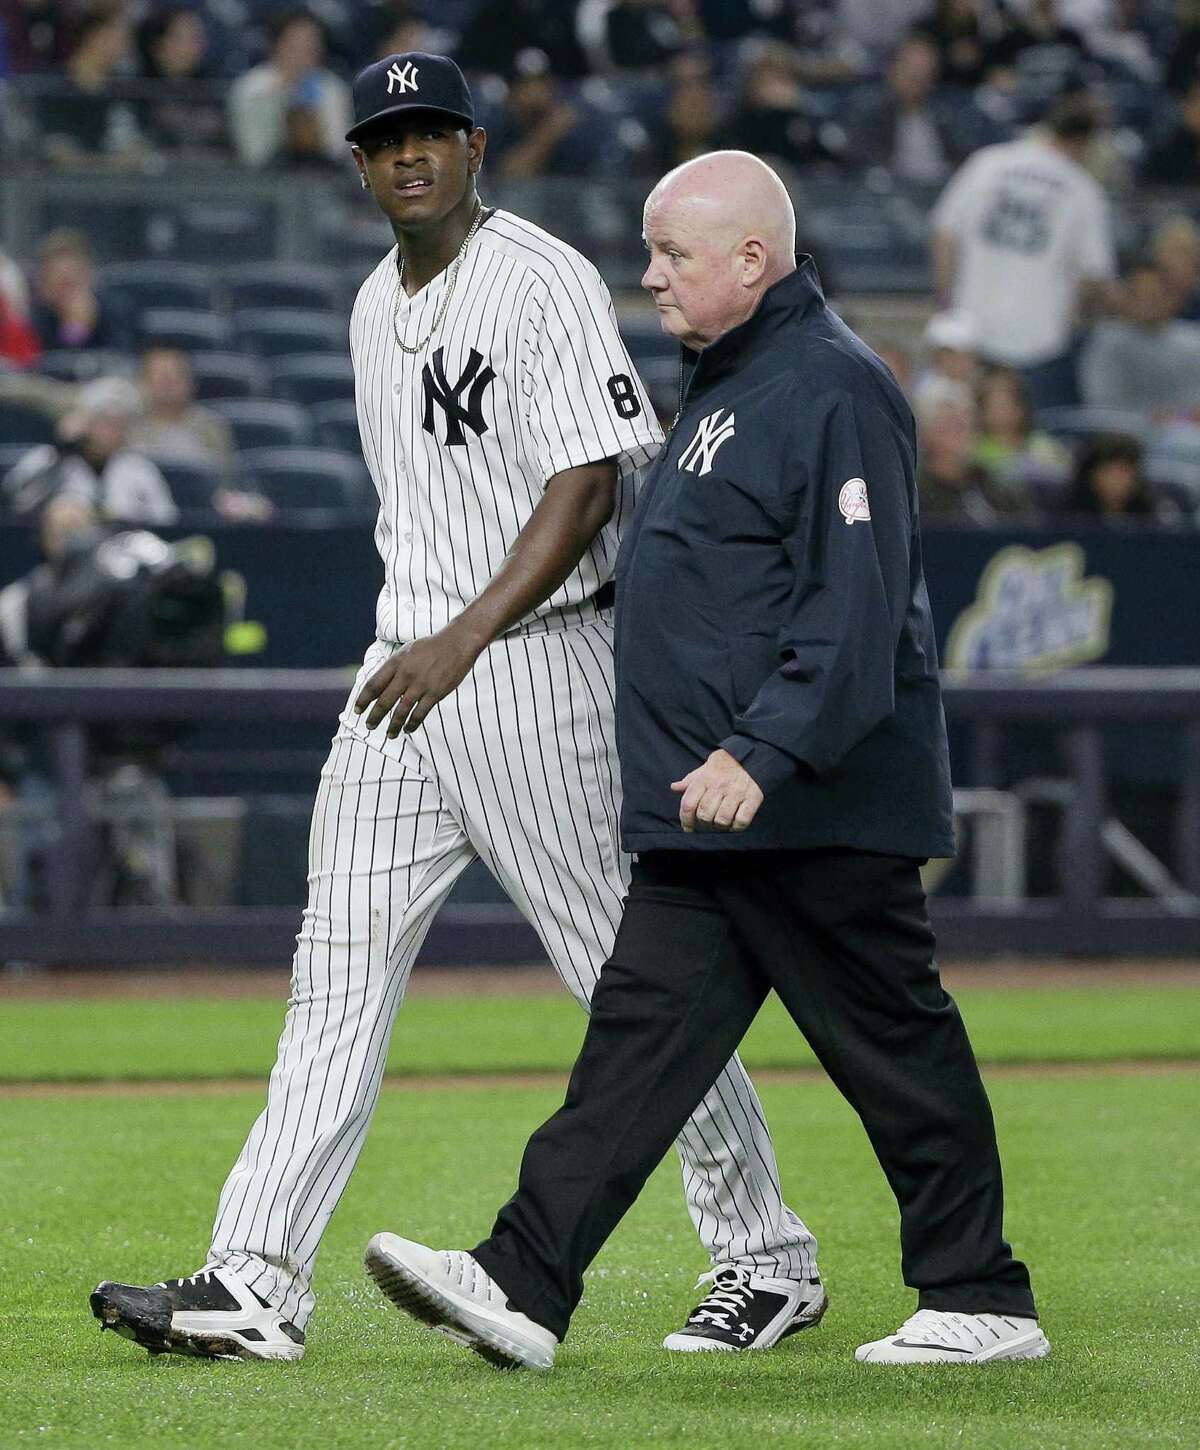 Yankees pitcher Luis Severino, left, walks off the field with head trainer Steve Donohue after giving up a two-run home run against the White Sox on Friday.